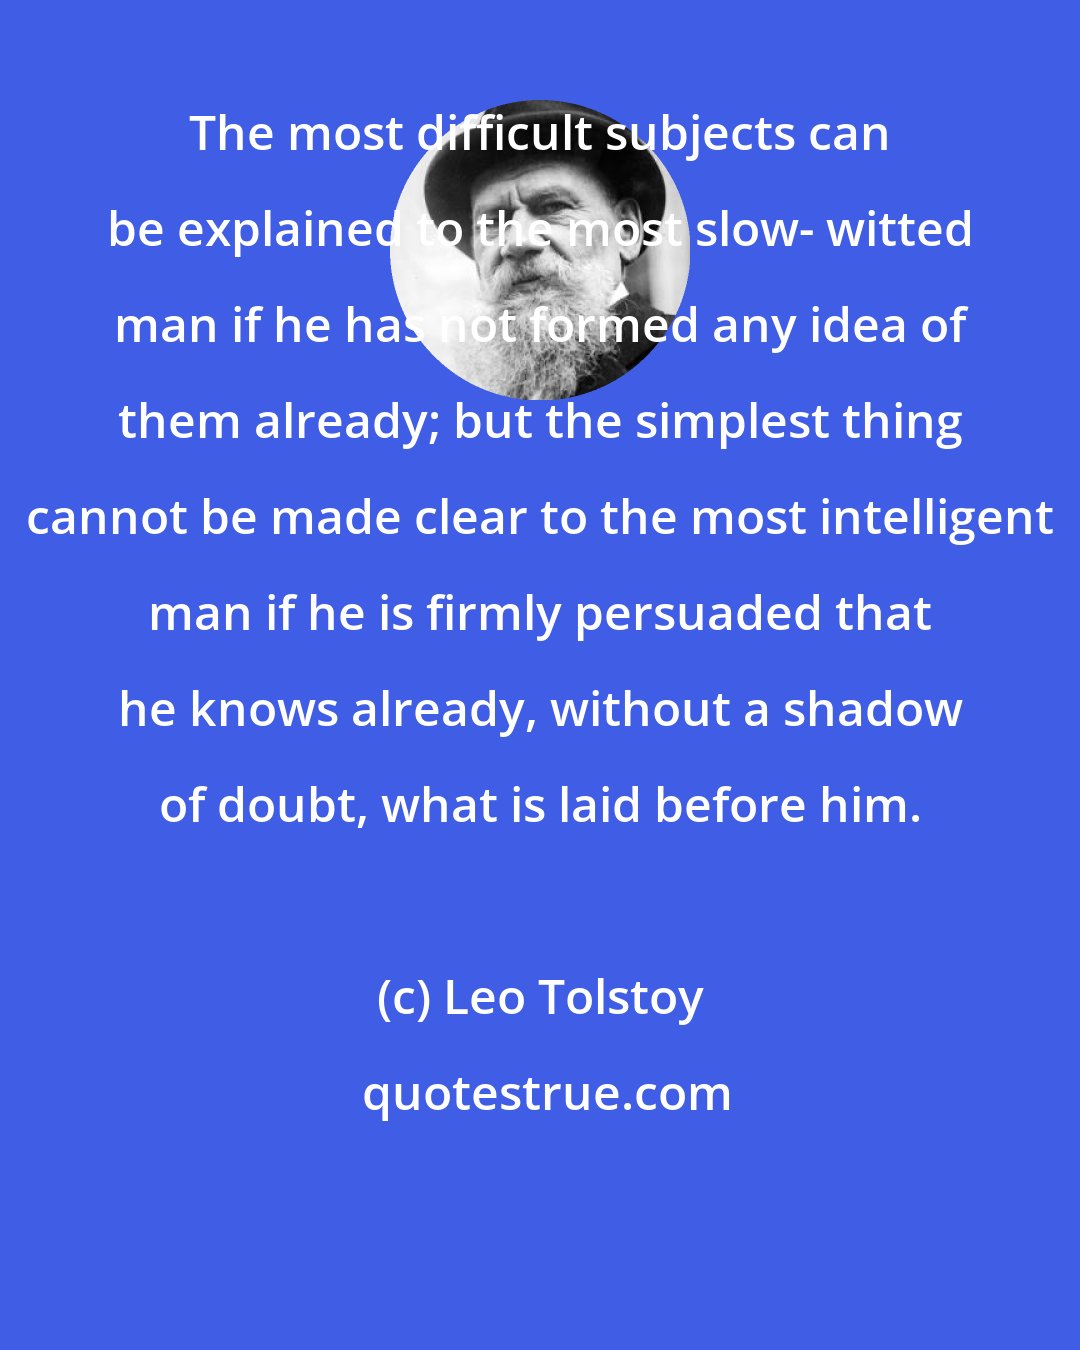 Leo Tolstoy: The most difficult subjects can be explained to the most slow- witted man if he has not formed any idea of them already; but the simplest thing cannot be made clear to the most intelligent man if he is firmly persuaded that he knows already, without a shadow of doubt, what is laid before him.